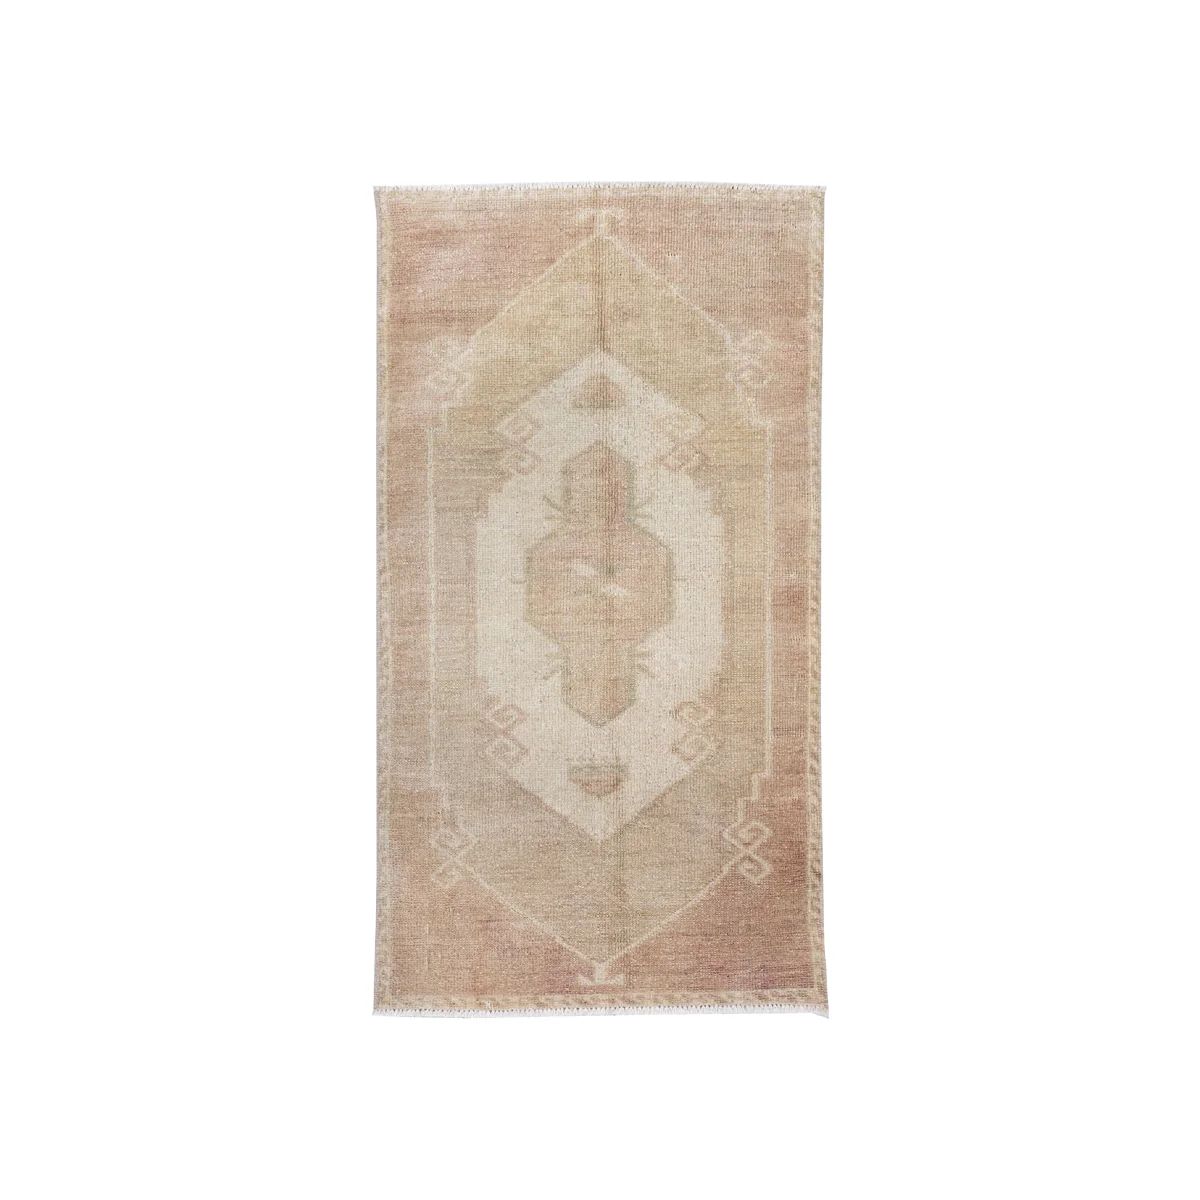 'Bess' Vintage Rug (2 x 3) | Tuesday Made